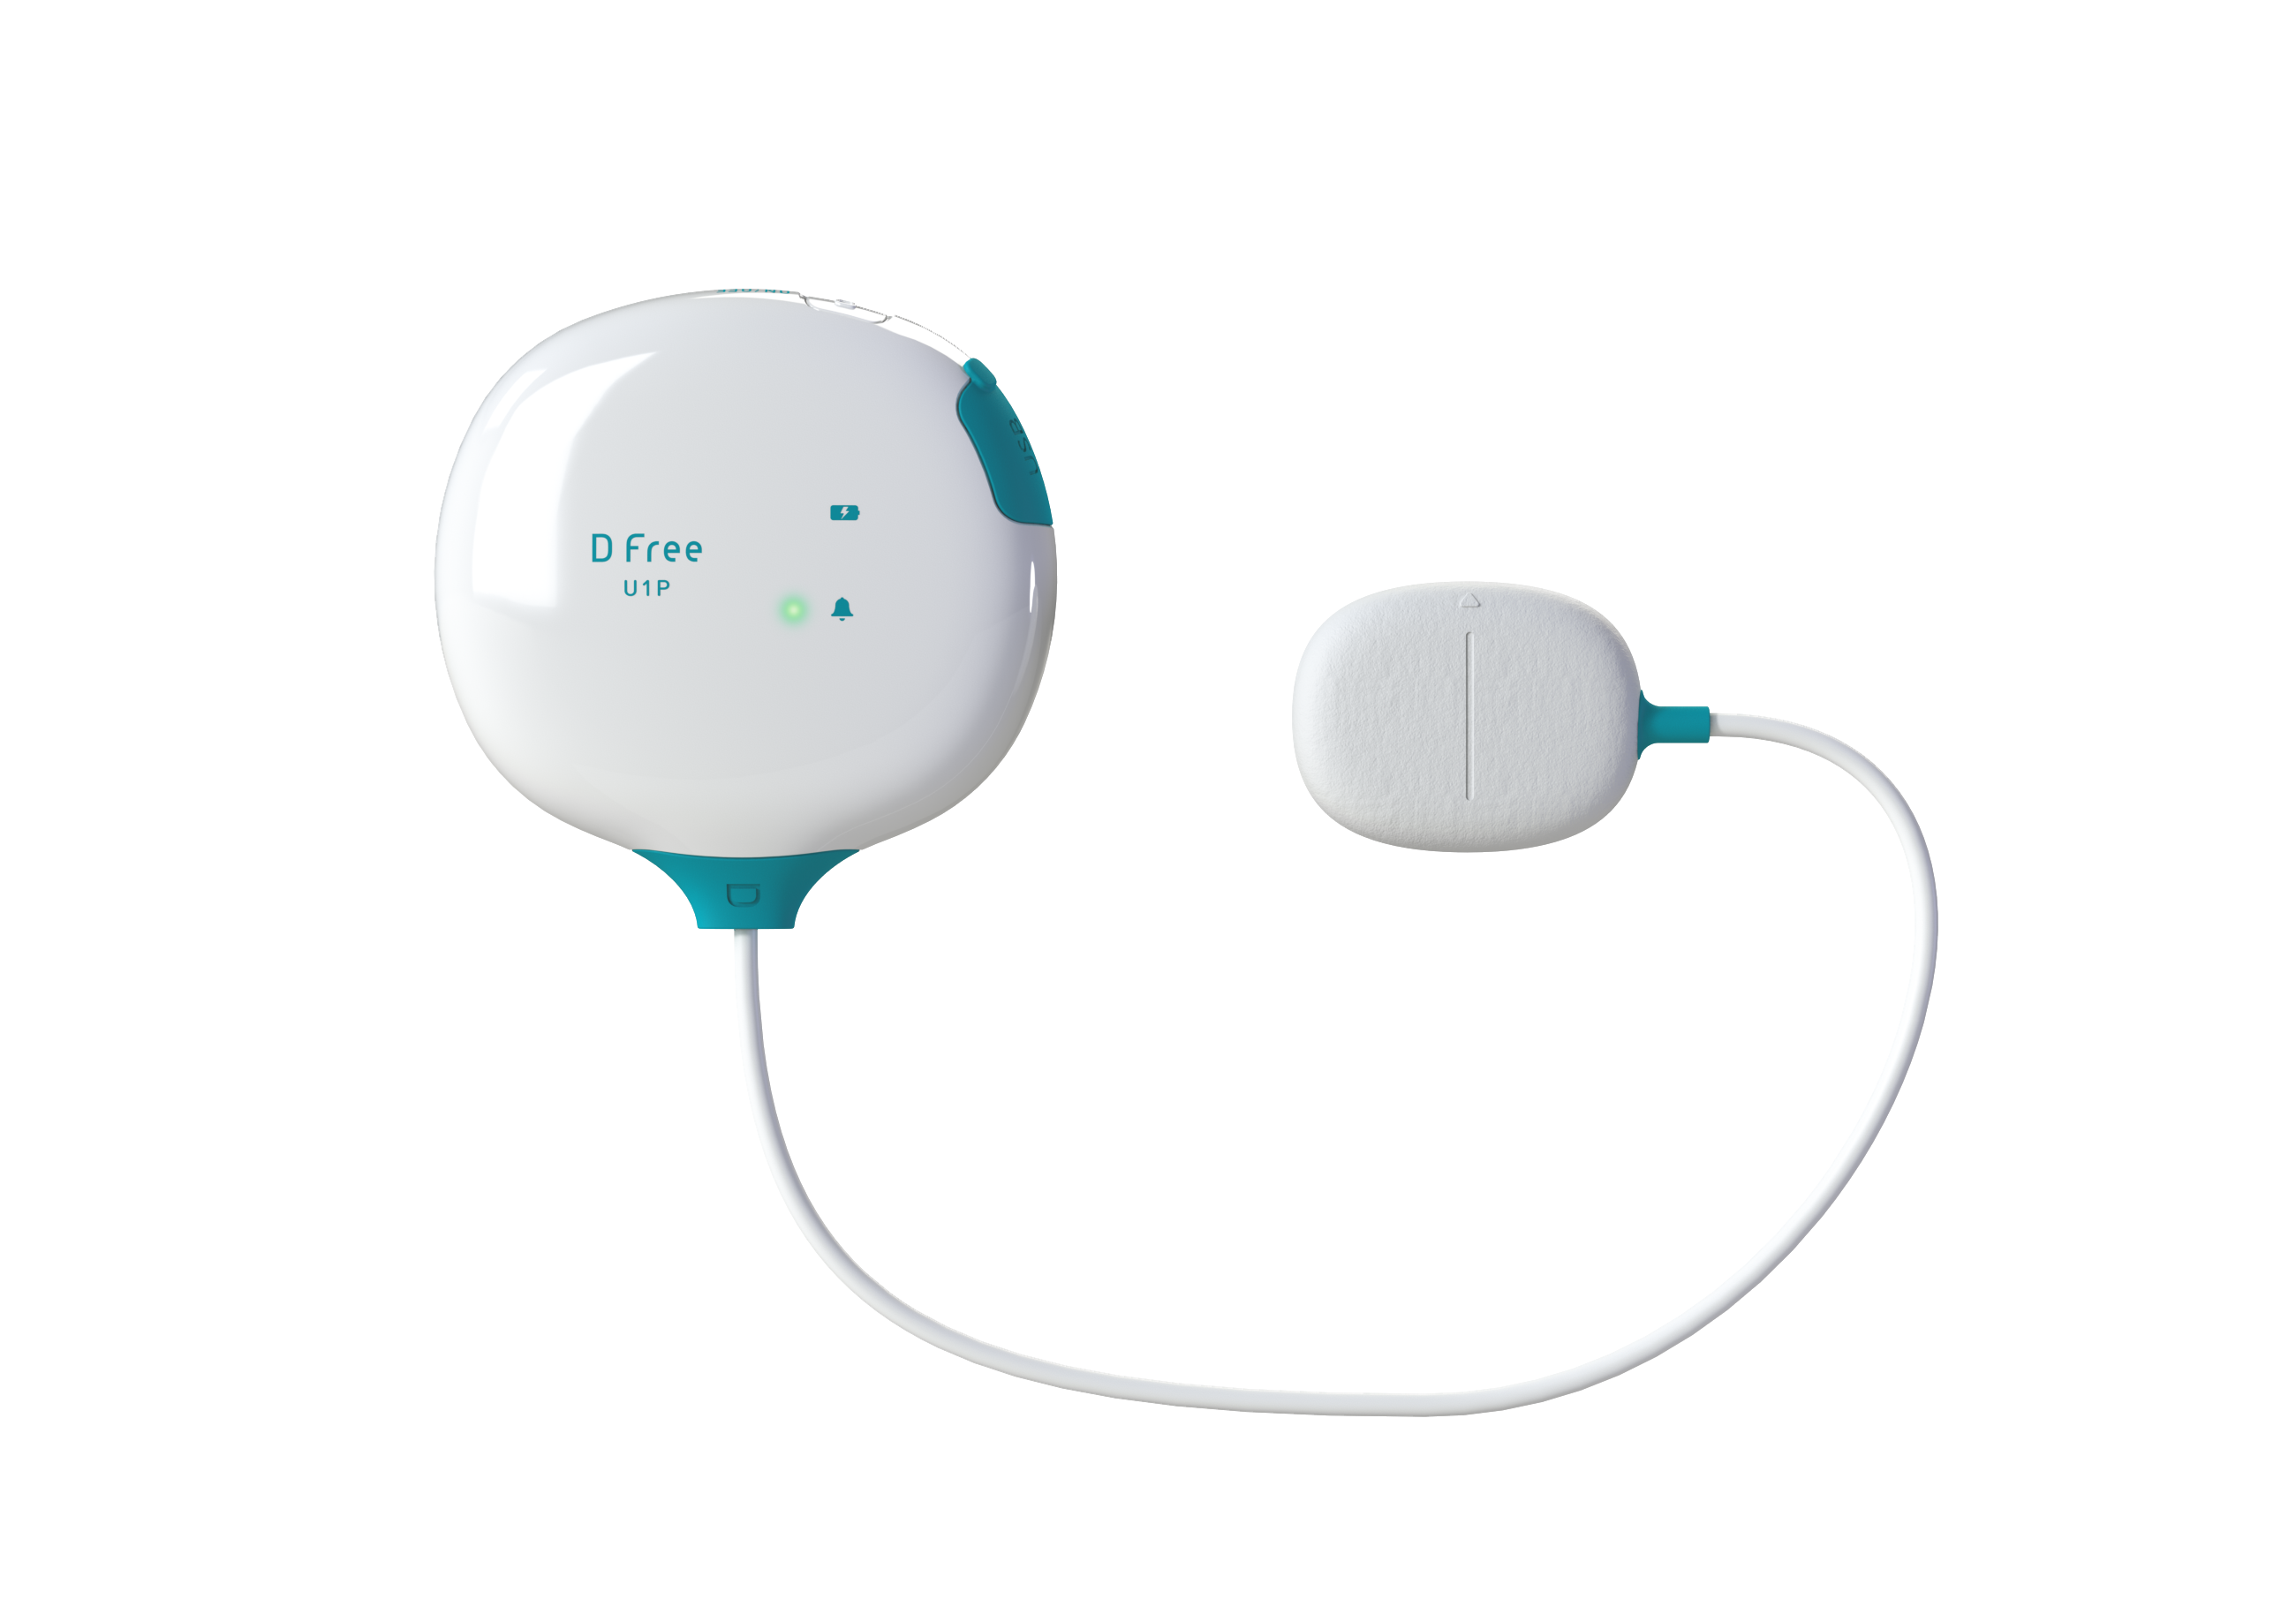 DFree is the first health tech wearable device for incontinence that notifies the user via a smartphone or tablet when to go to the bathroom.